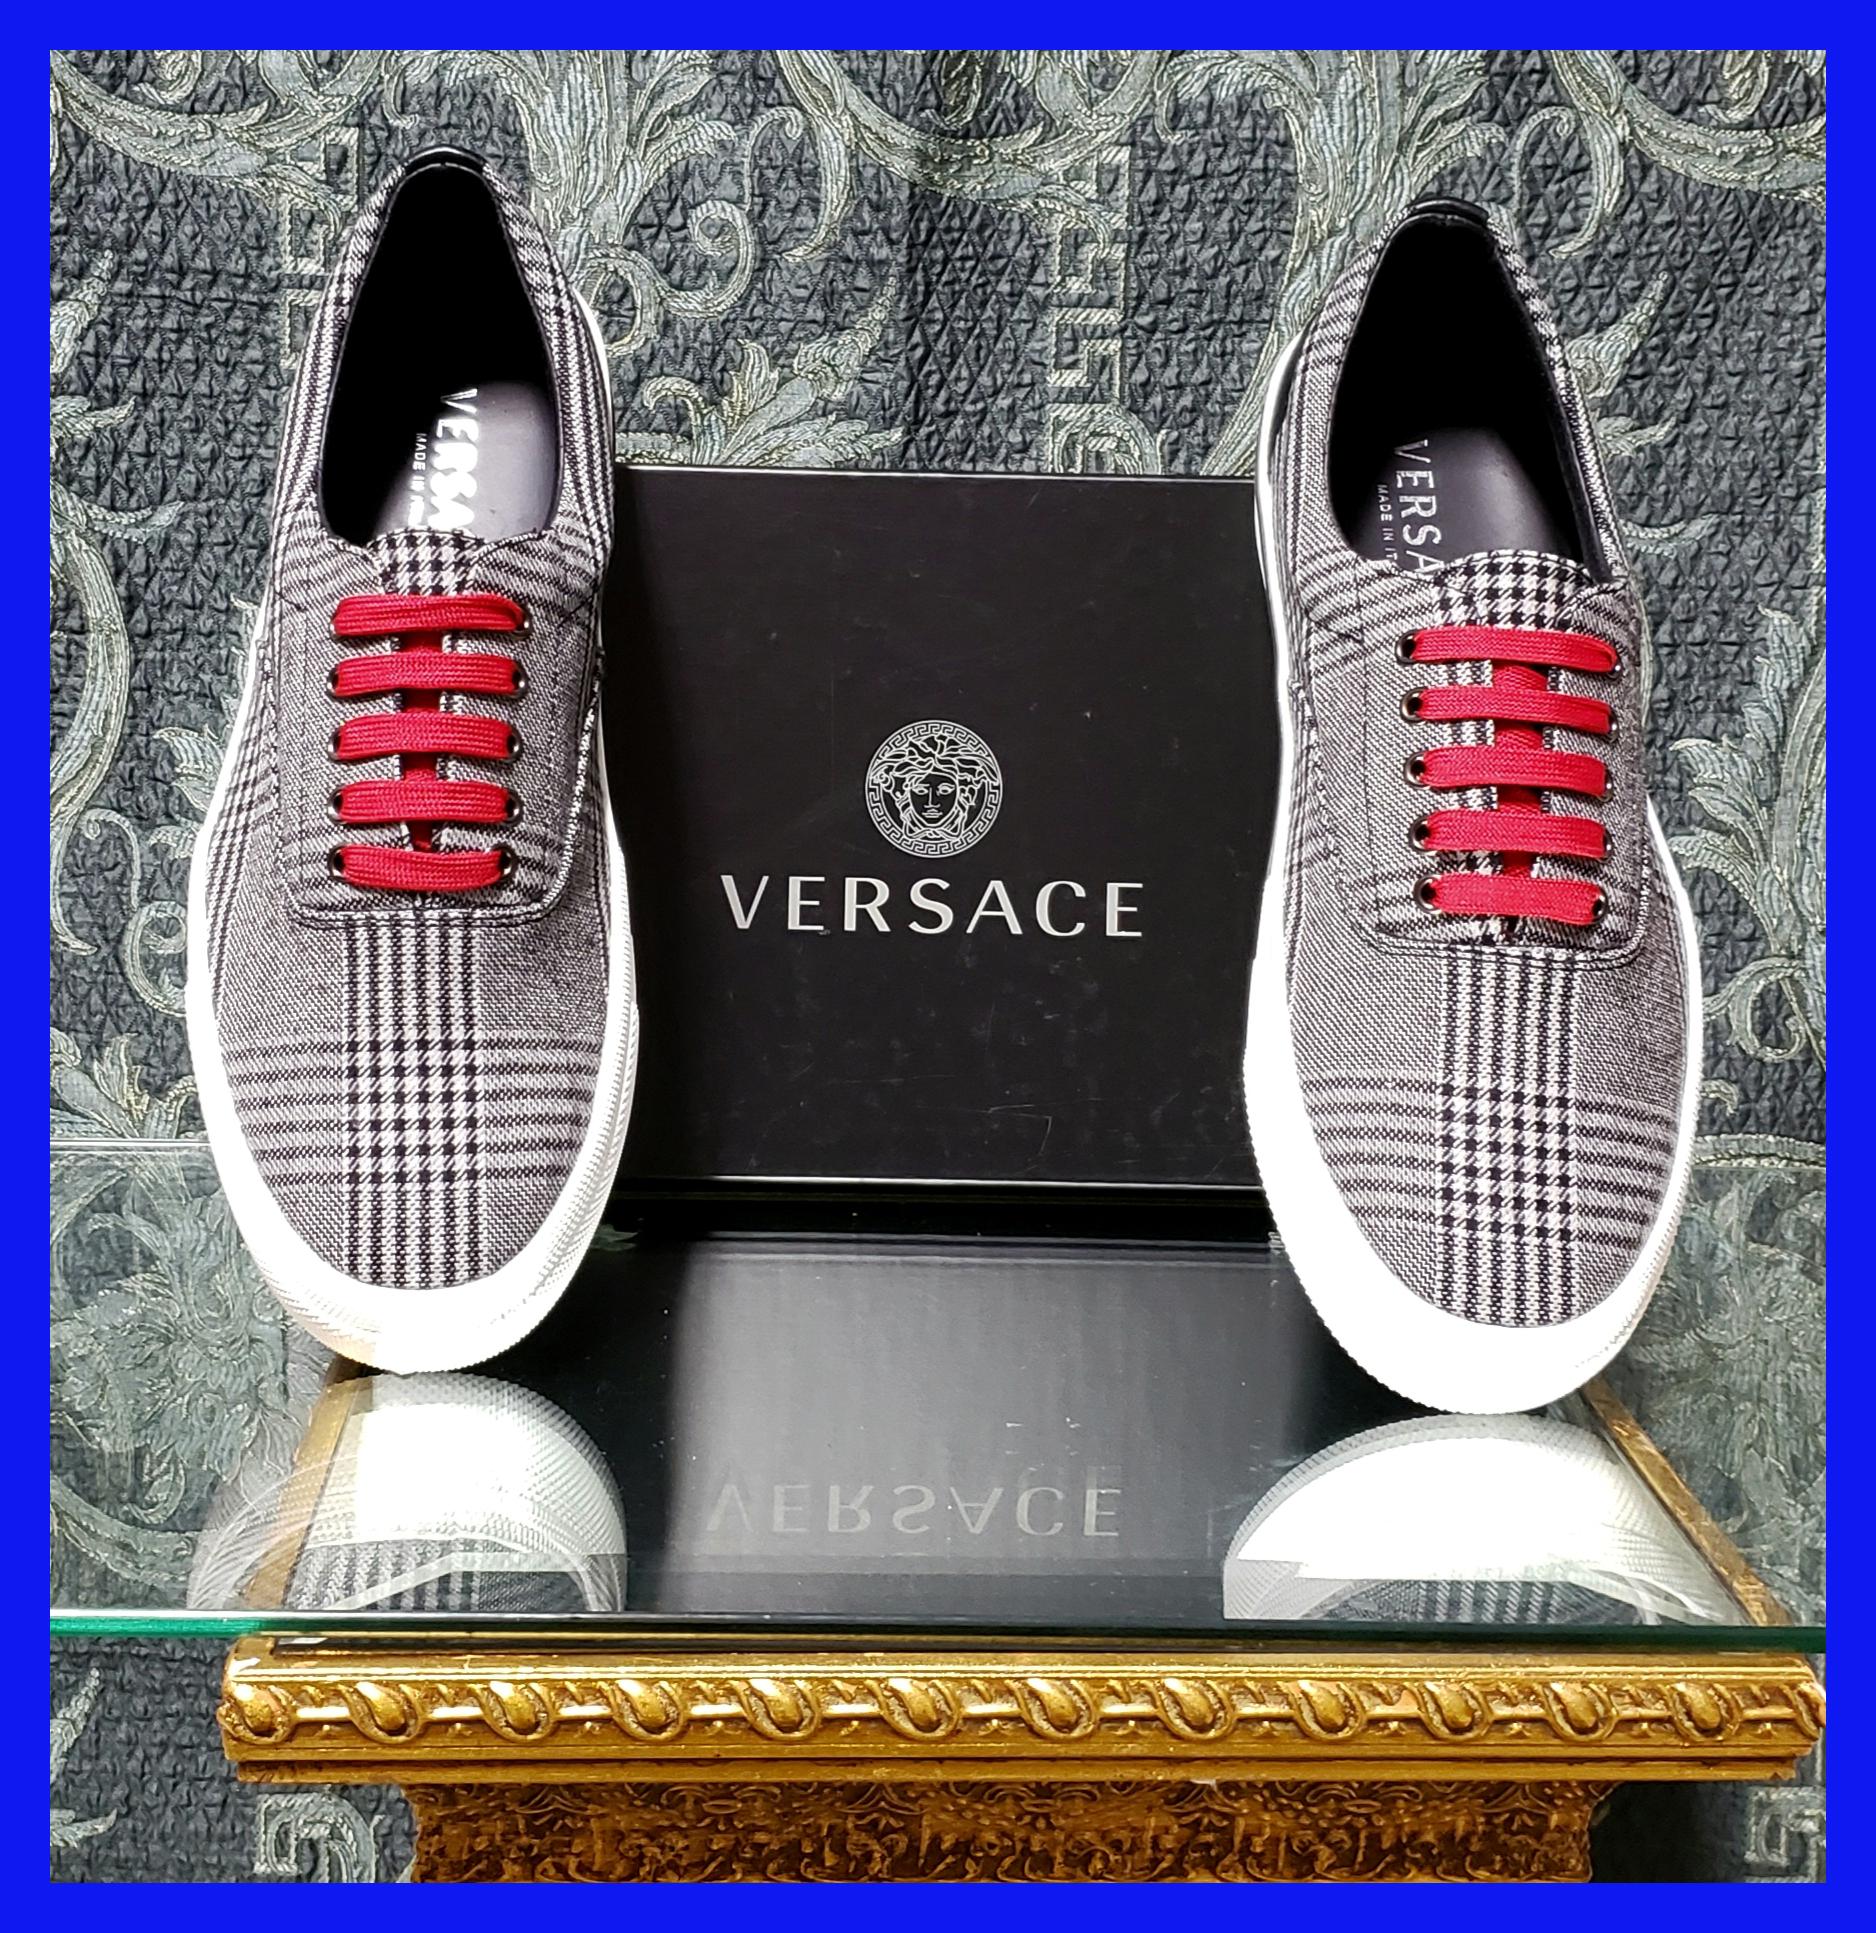 VERSACE 



TEXTILE GRAY SNEAKERS w/SUEDE BACK



Round Toe 

Lace up 

Leather perforated Insole 

Rubber sole 

Italian size is 43 - US 10
Italian size is 44 - US 11

Made in Italy
Brand new. Comes with Versace box and Versace signature dust